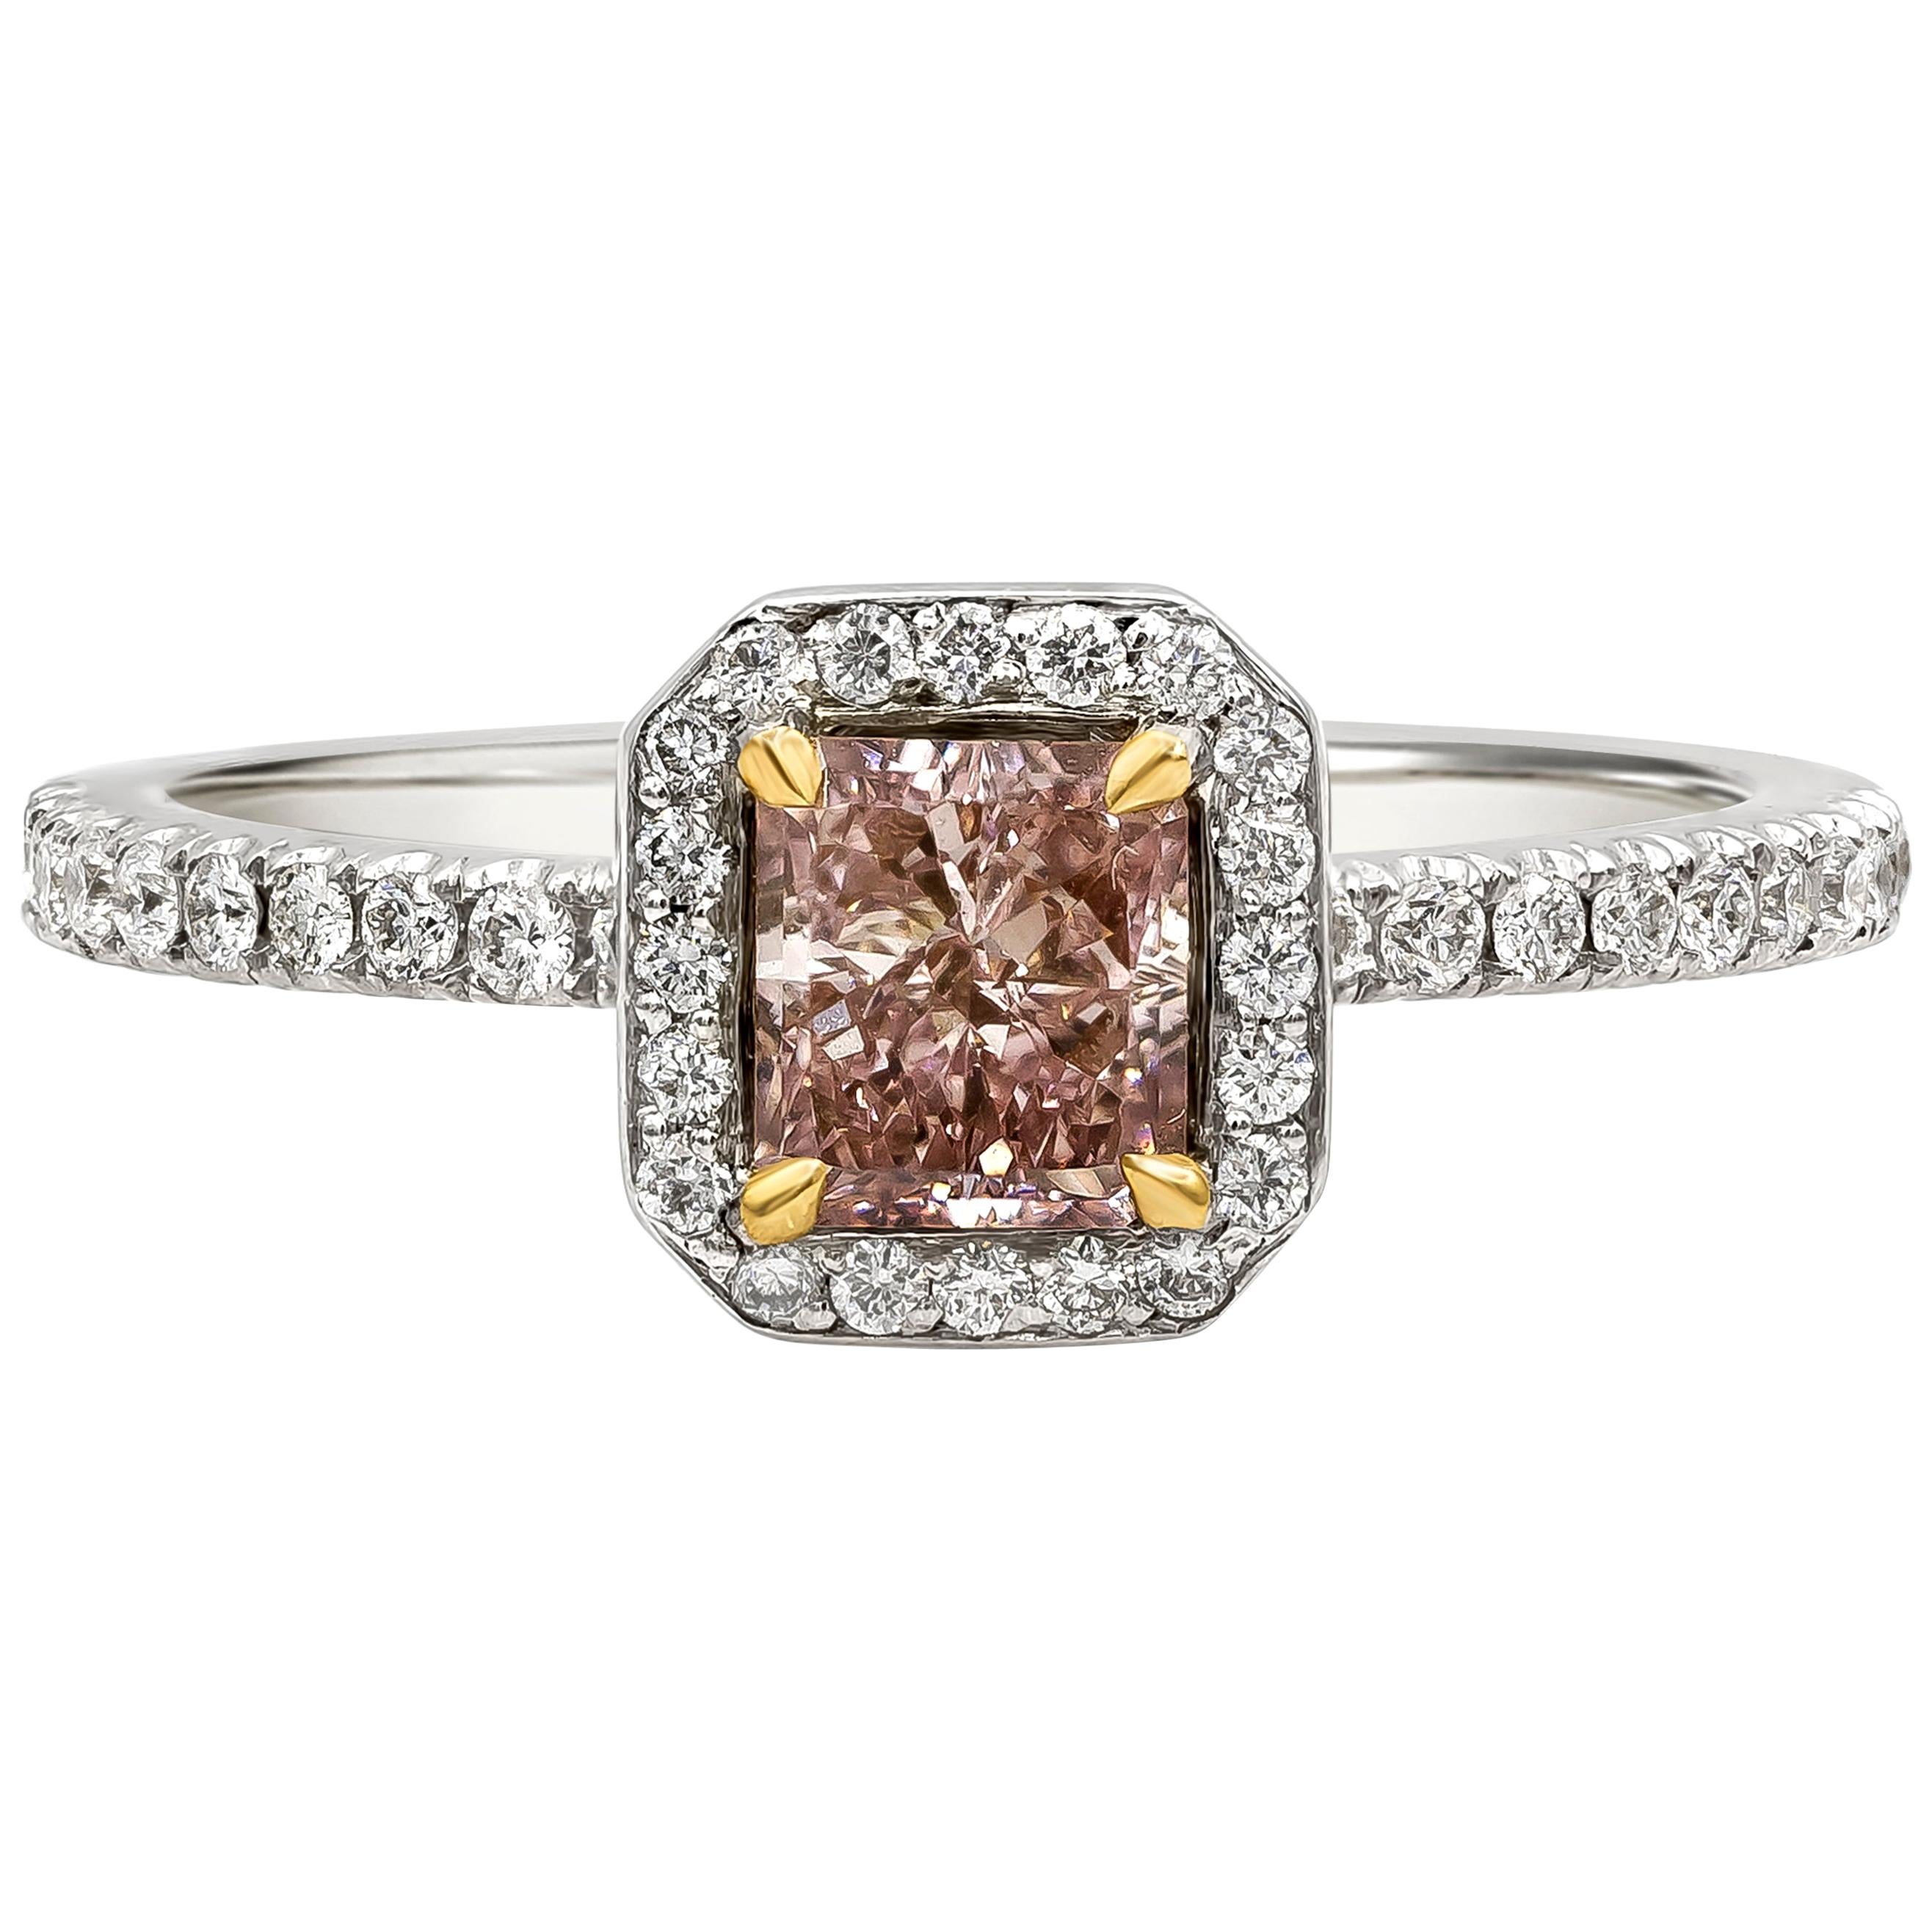 GIA Certified 0.73 Carats Fancy Orangy Pink Cushion Cut Diamond Engagement Ring